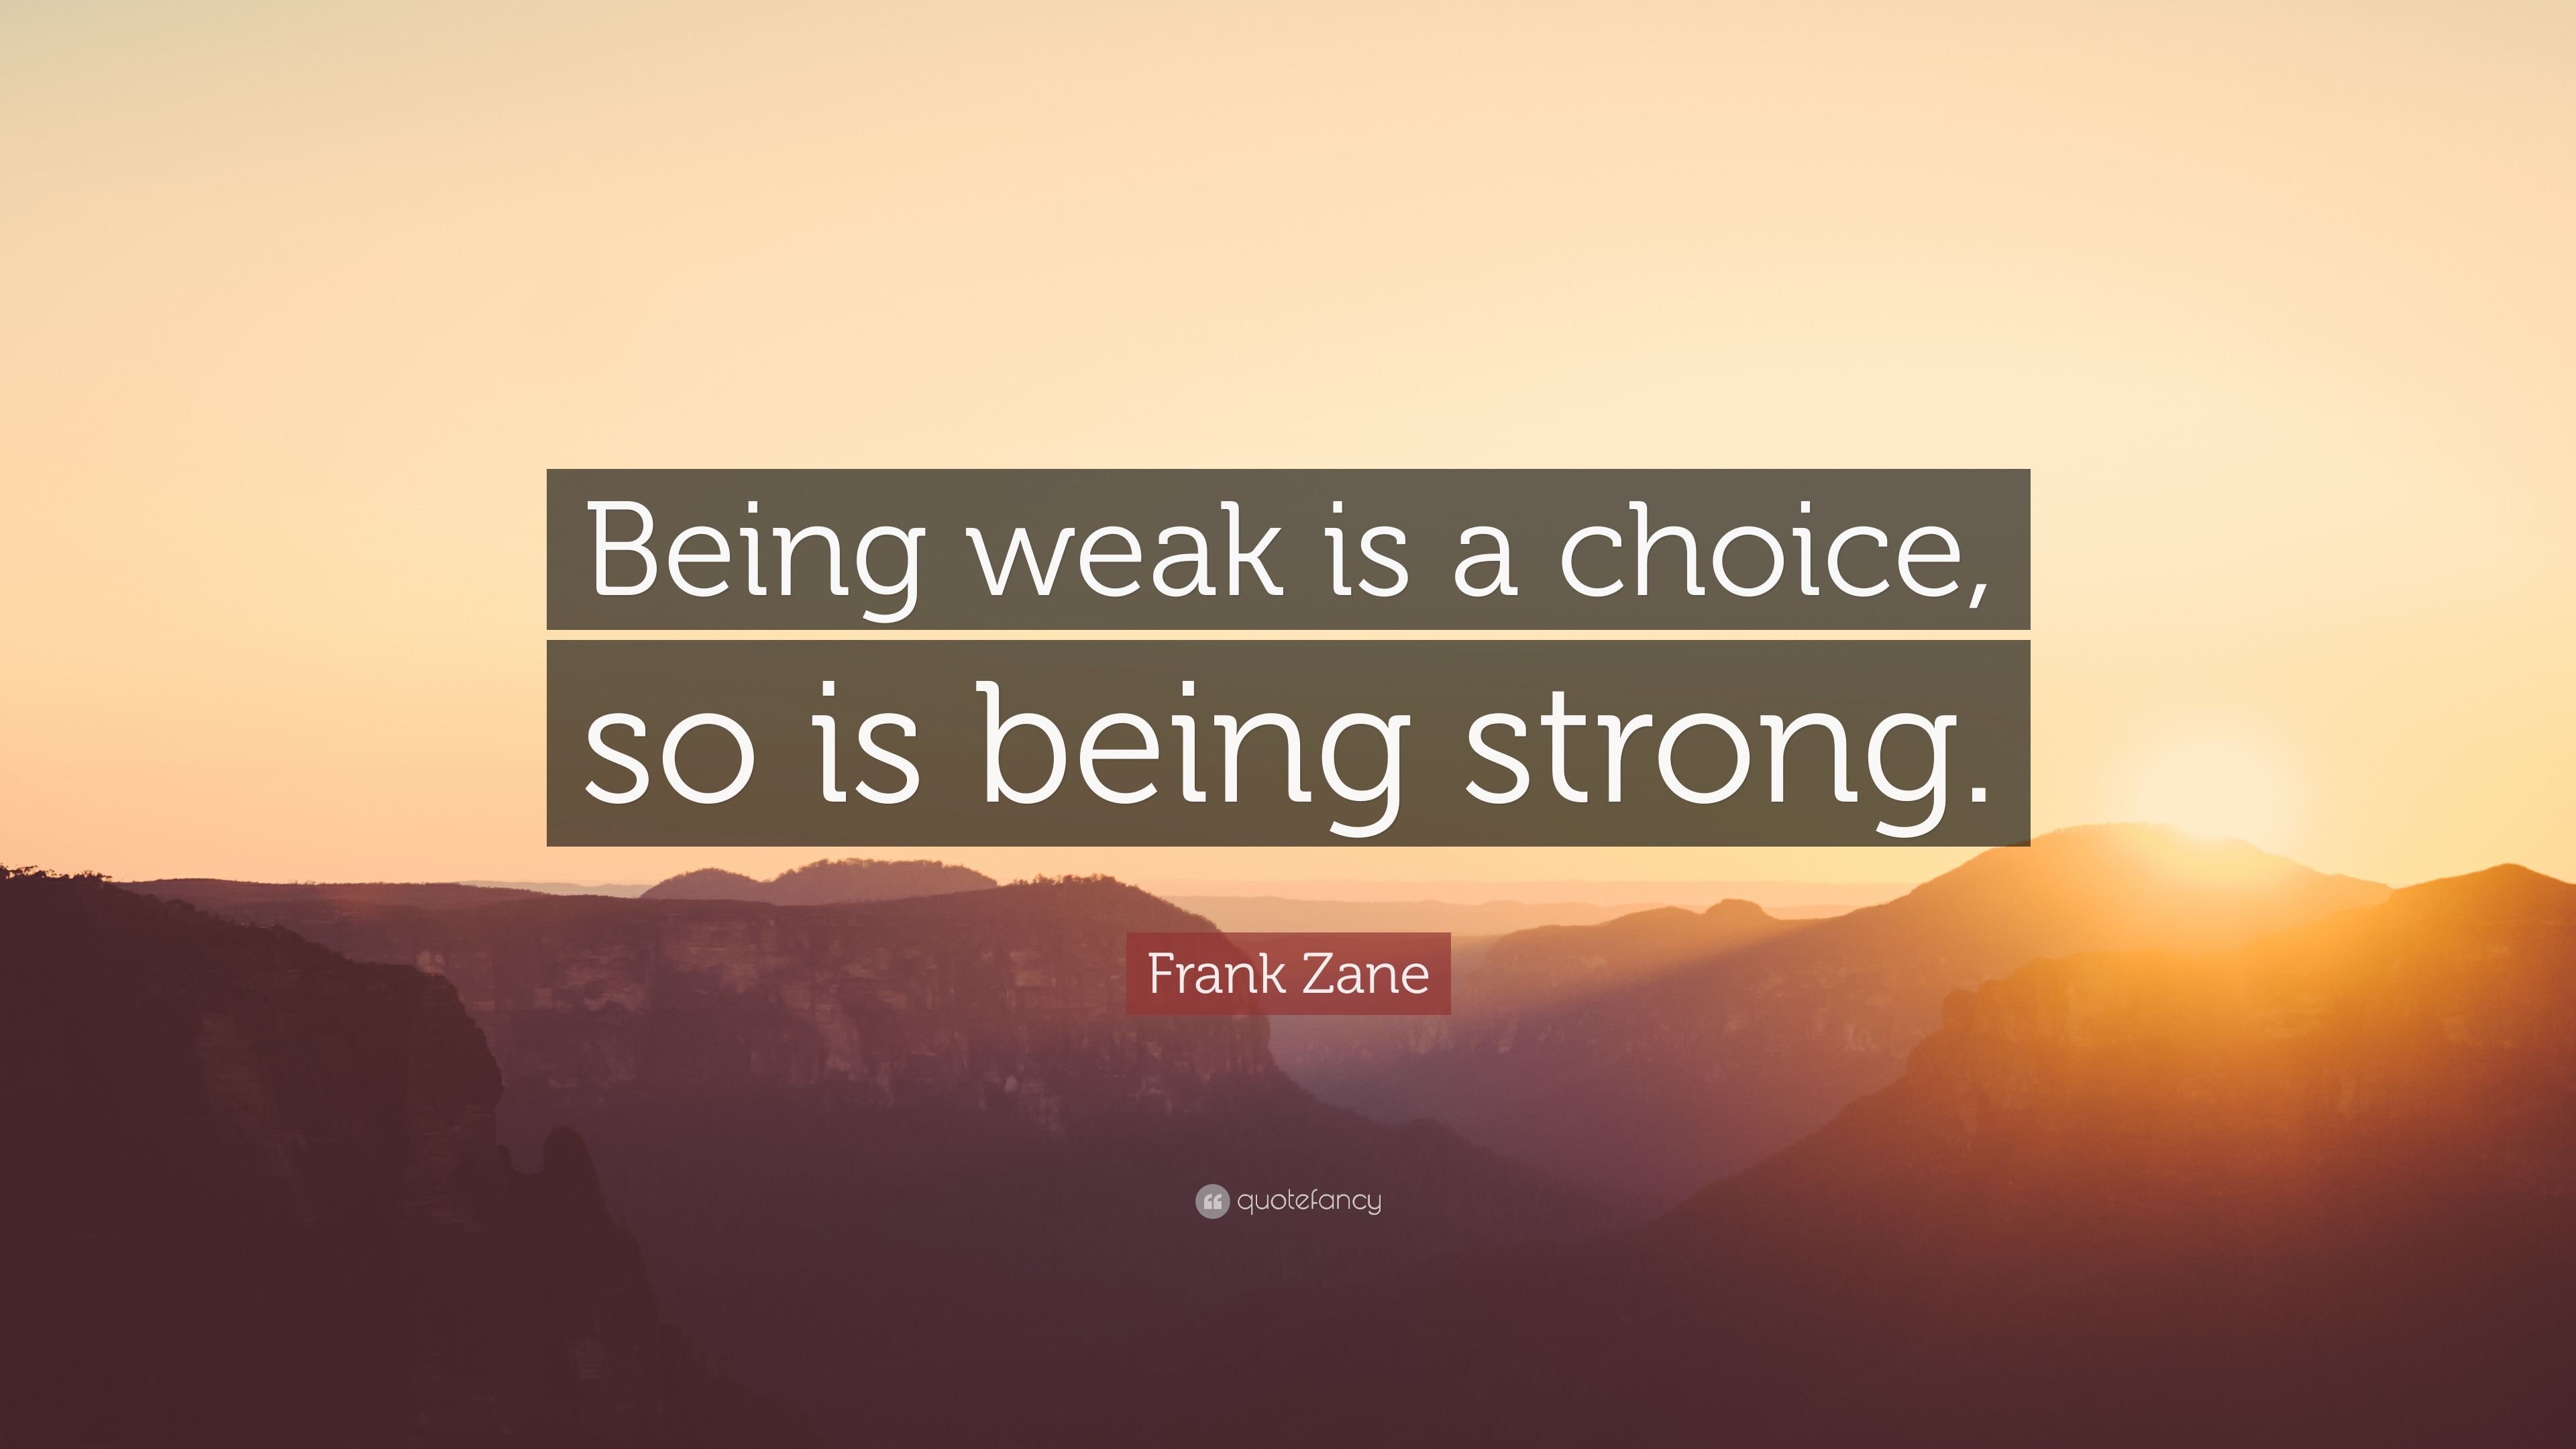 1579765 Frank Zane Quote Being weak is a choice so is being strong